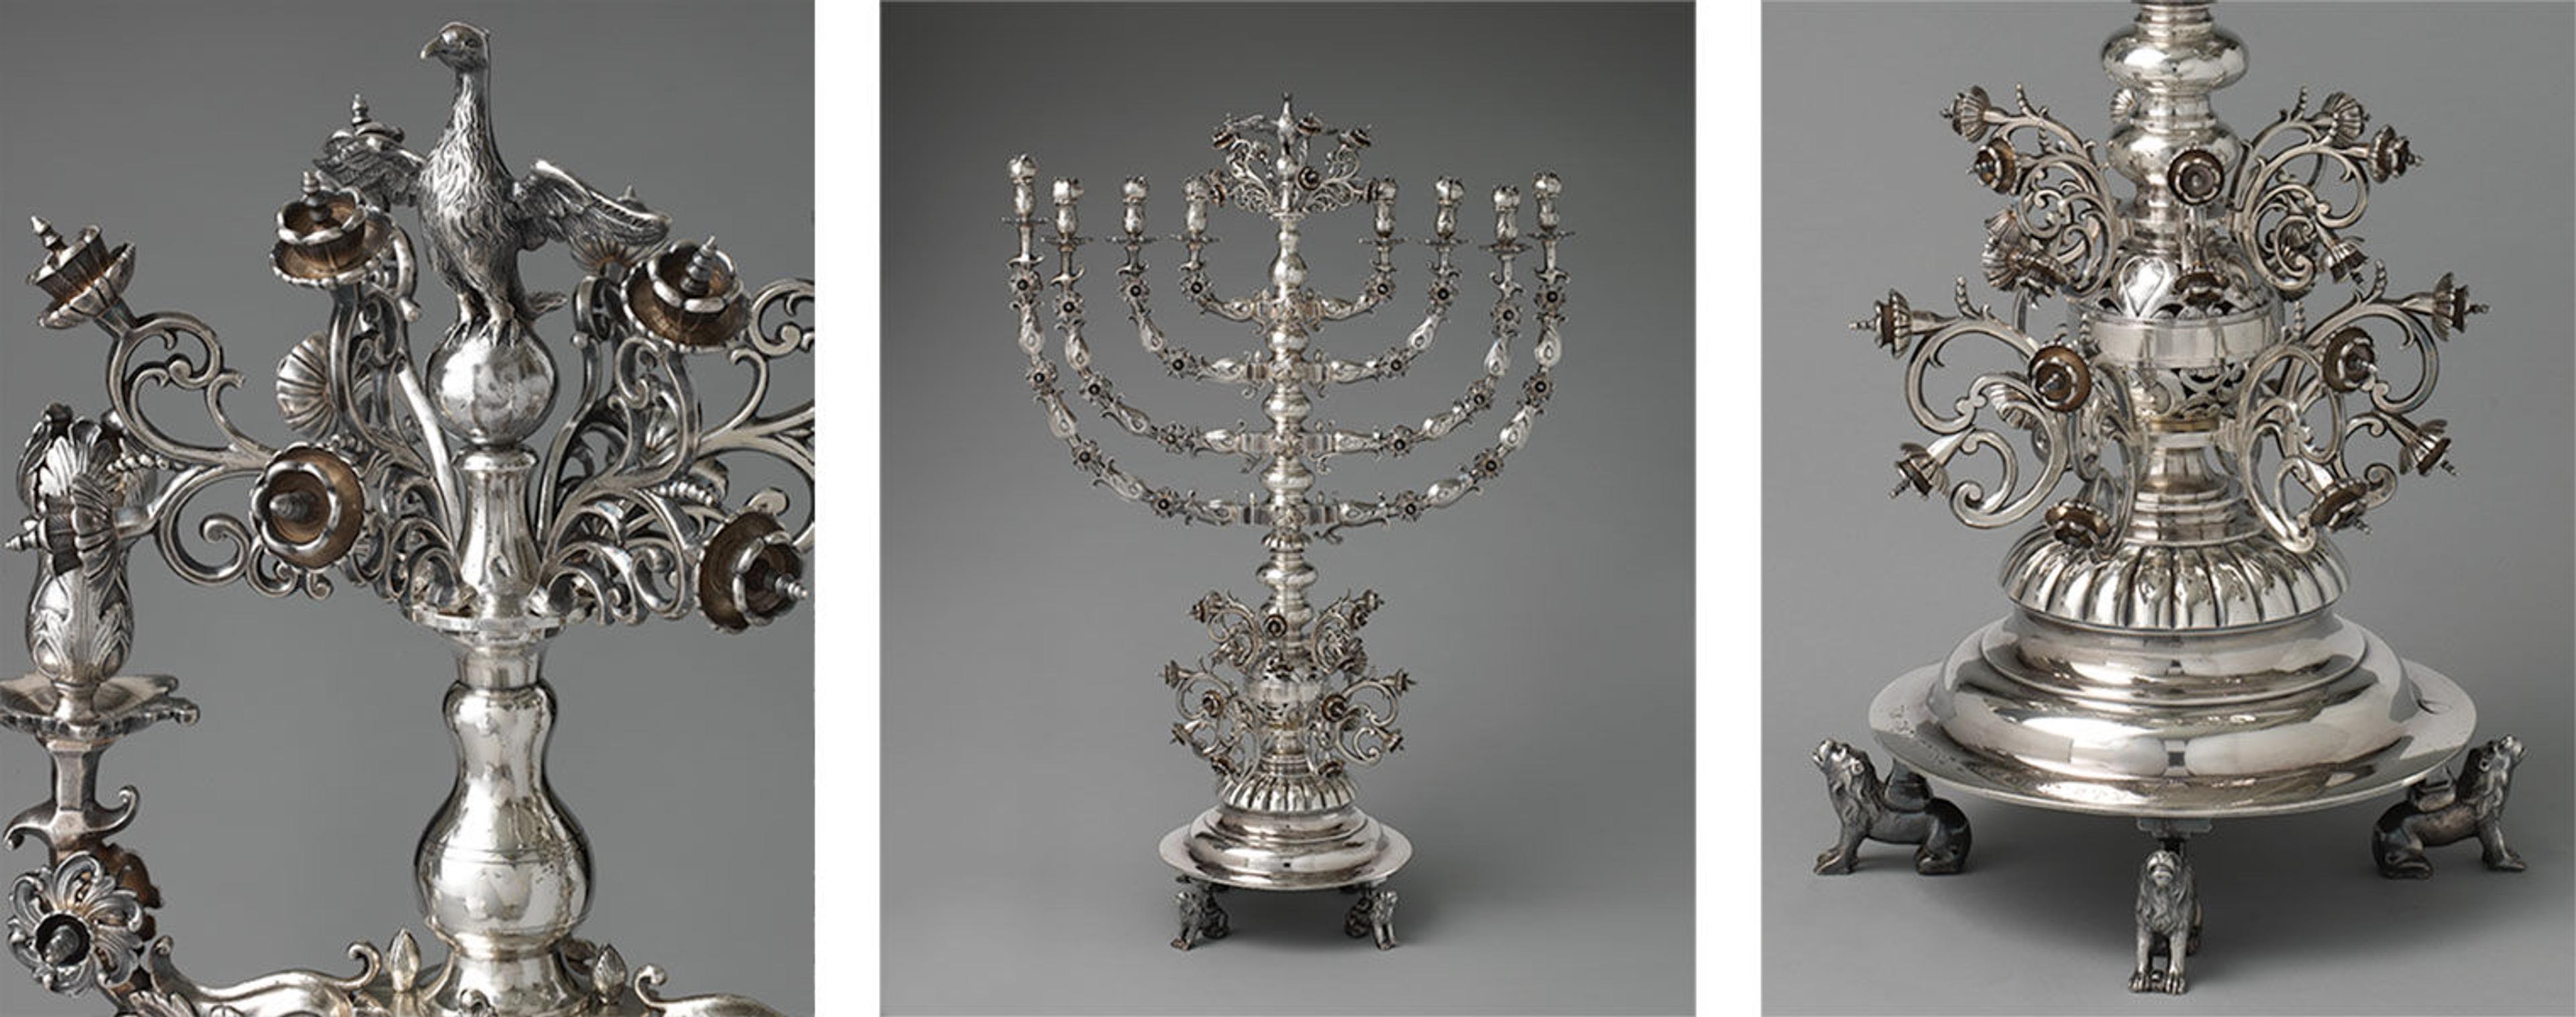 Triptych of the beautiful silver Lemberg lamp. Left: detail of eagle; center: frontal view of Lemberg lamp; right: detail of lions upholding lamp base.